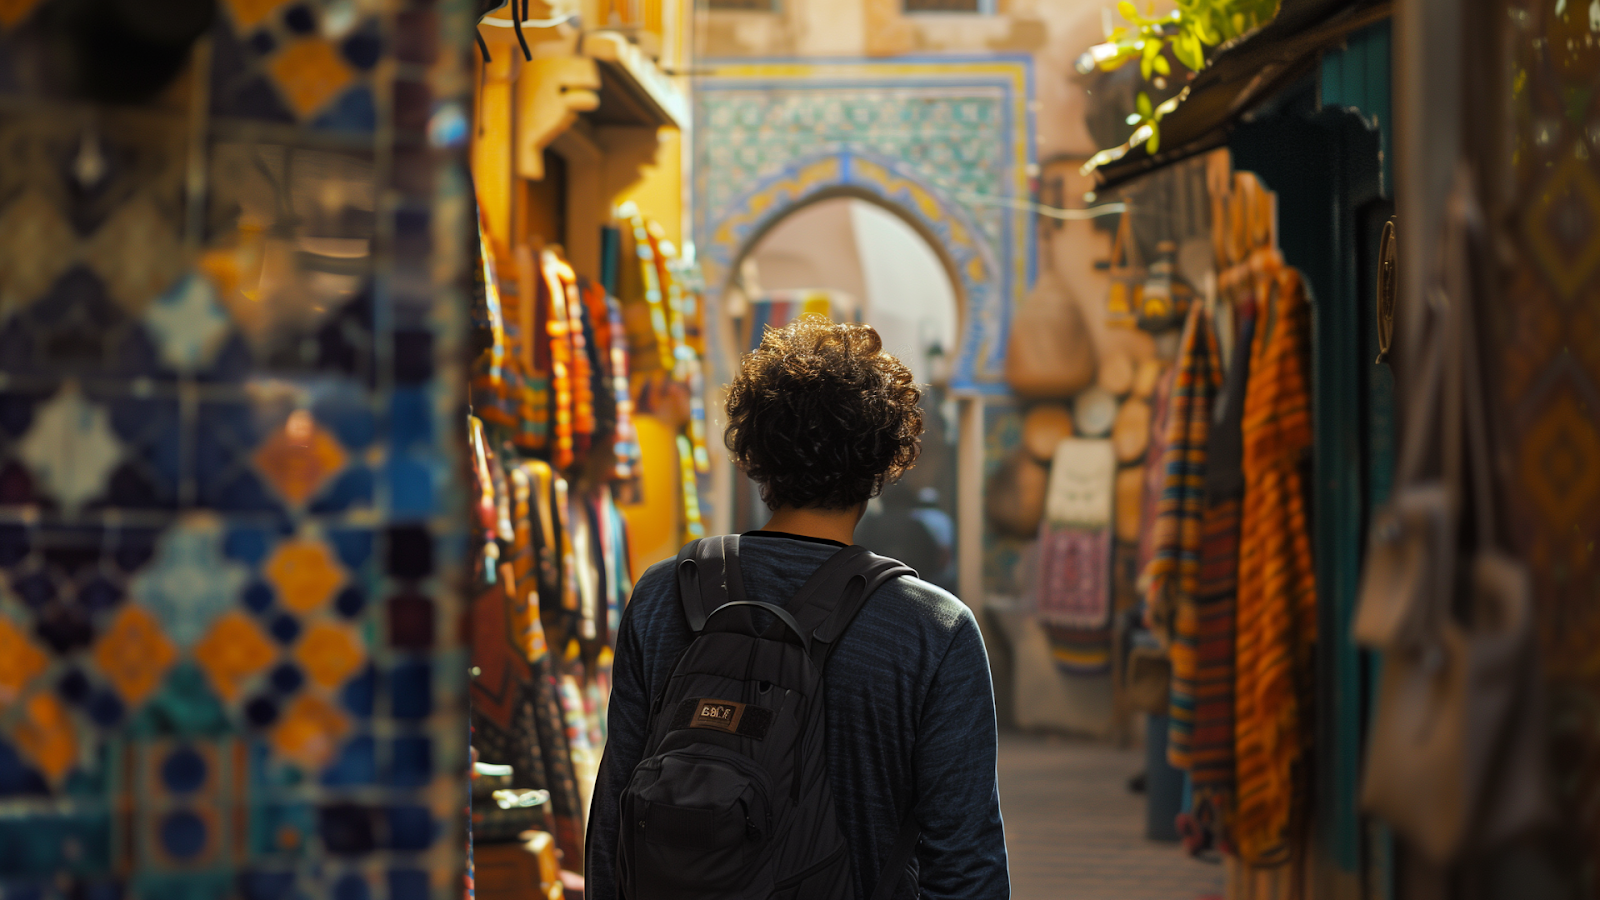 Traveler exploring the colorful, mosaic-lined streets of Marrakech's medina.